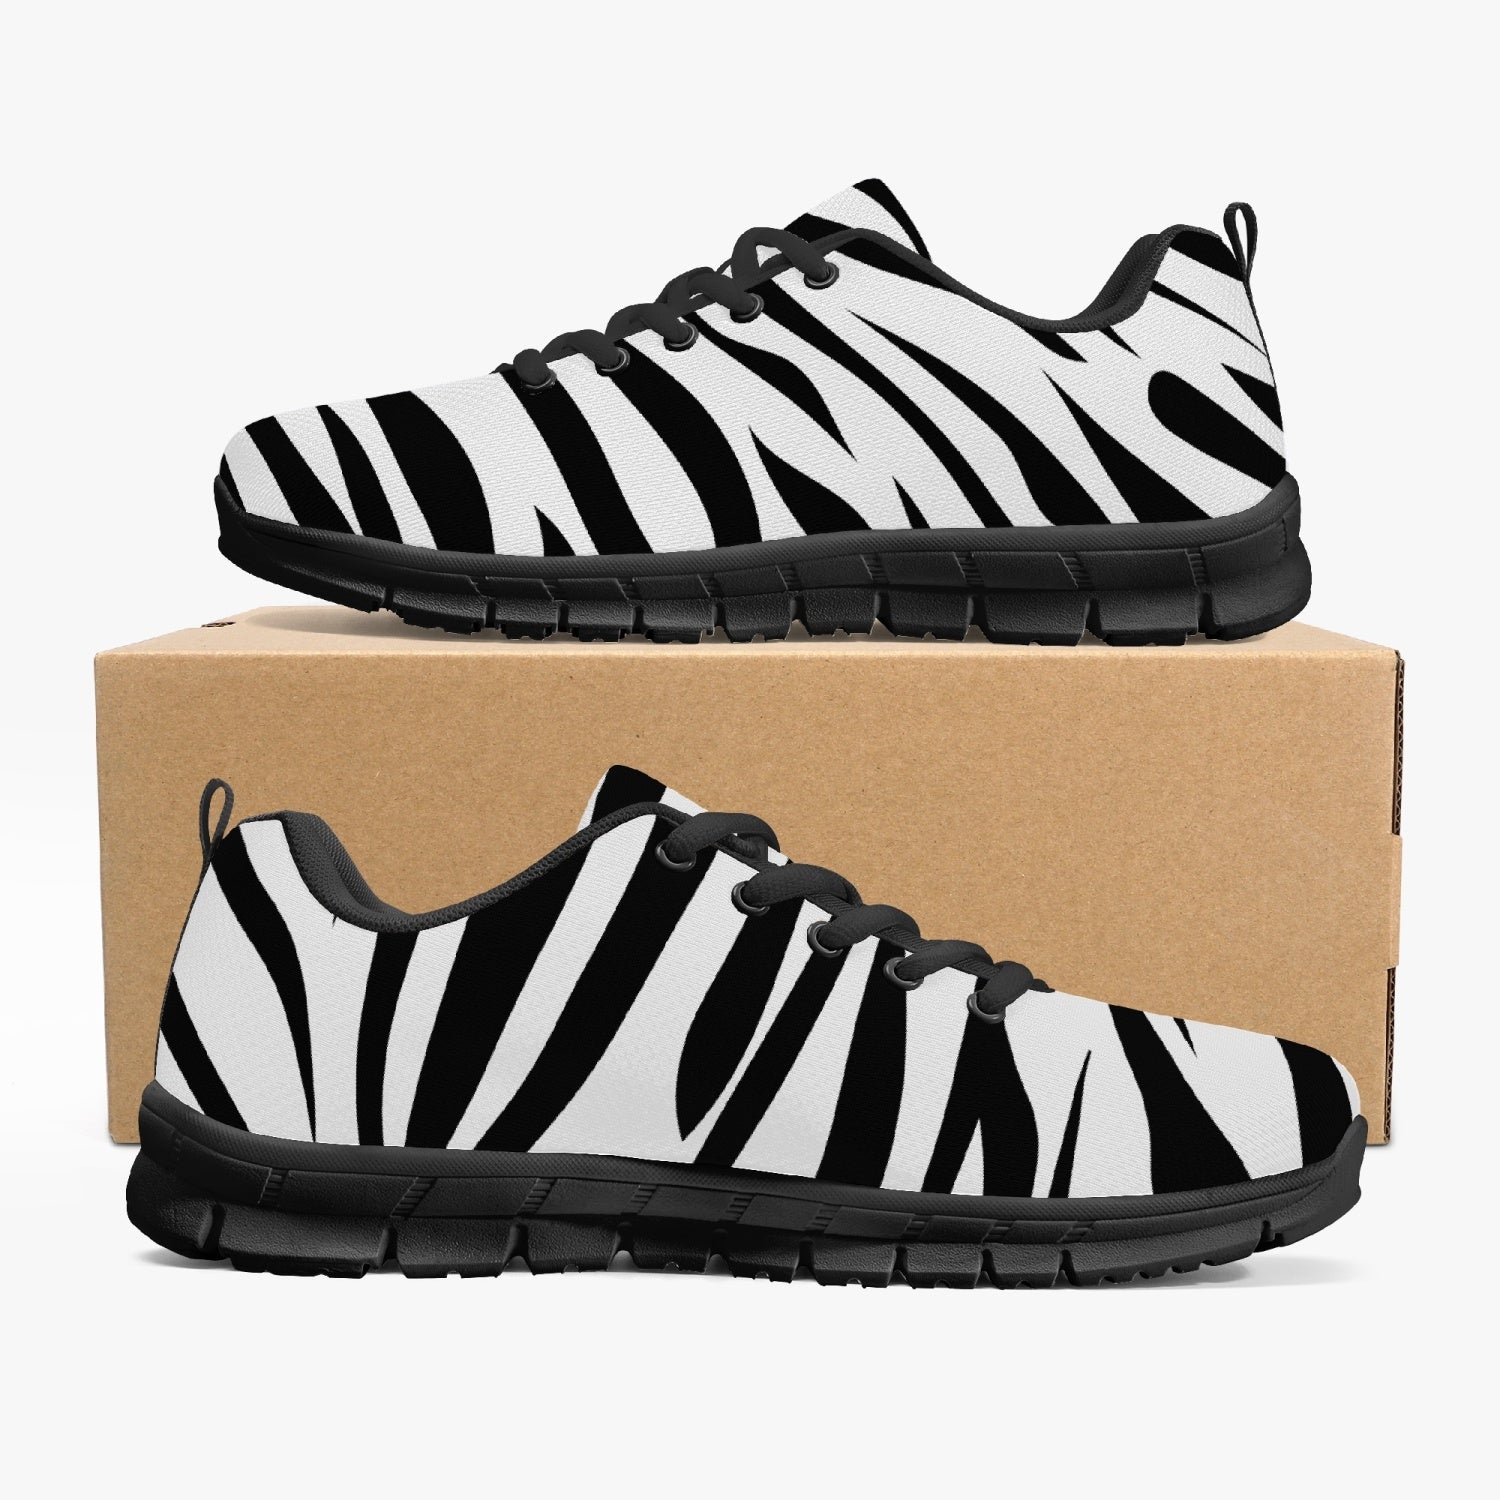 Unisex Back White Eye Of Bengal Tiger Running Shoes Sneakers